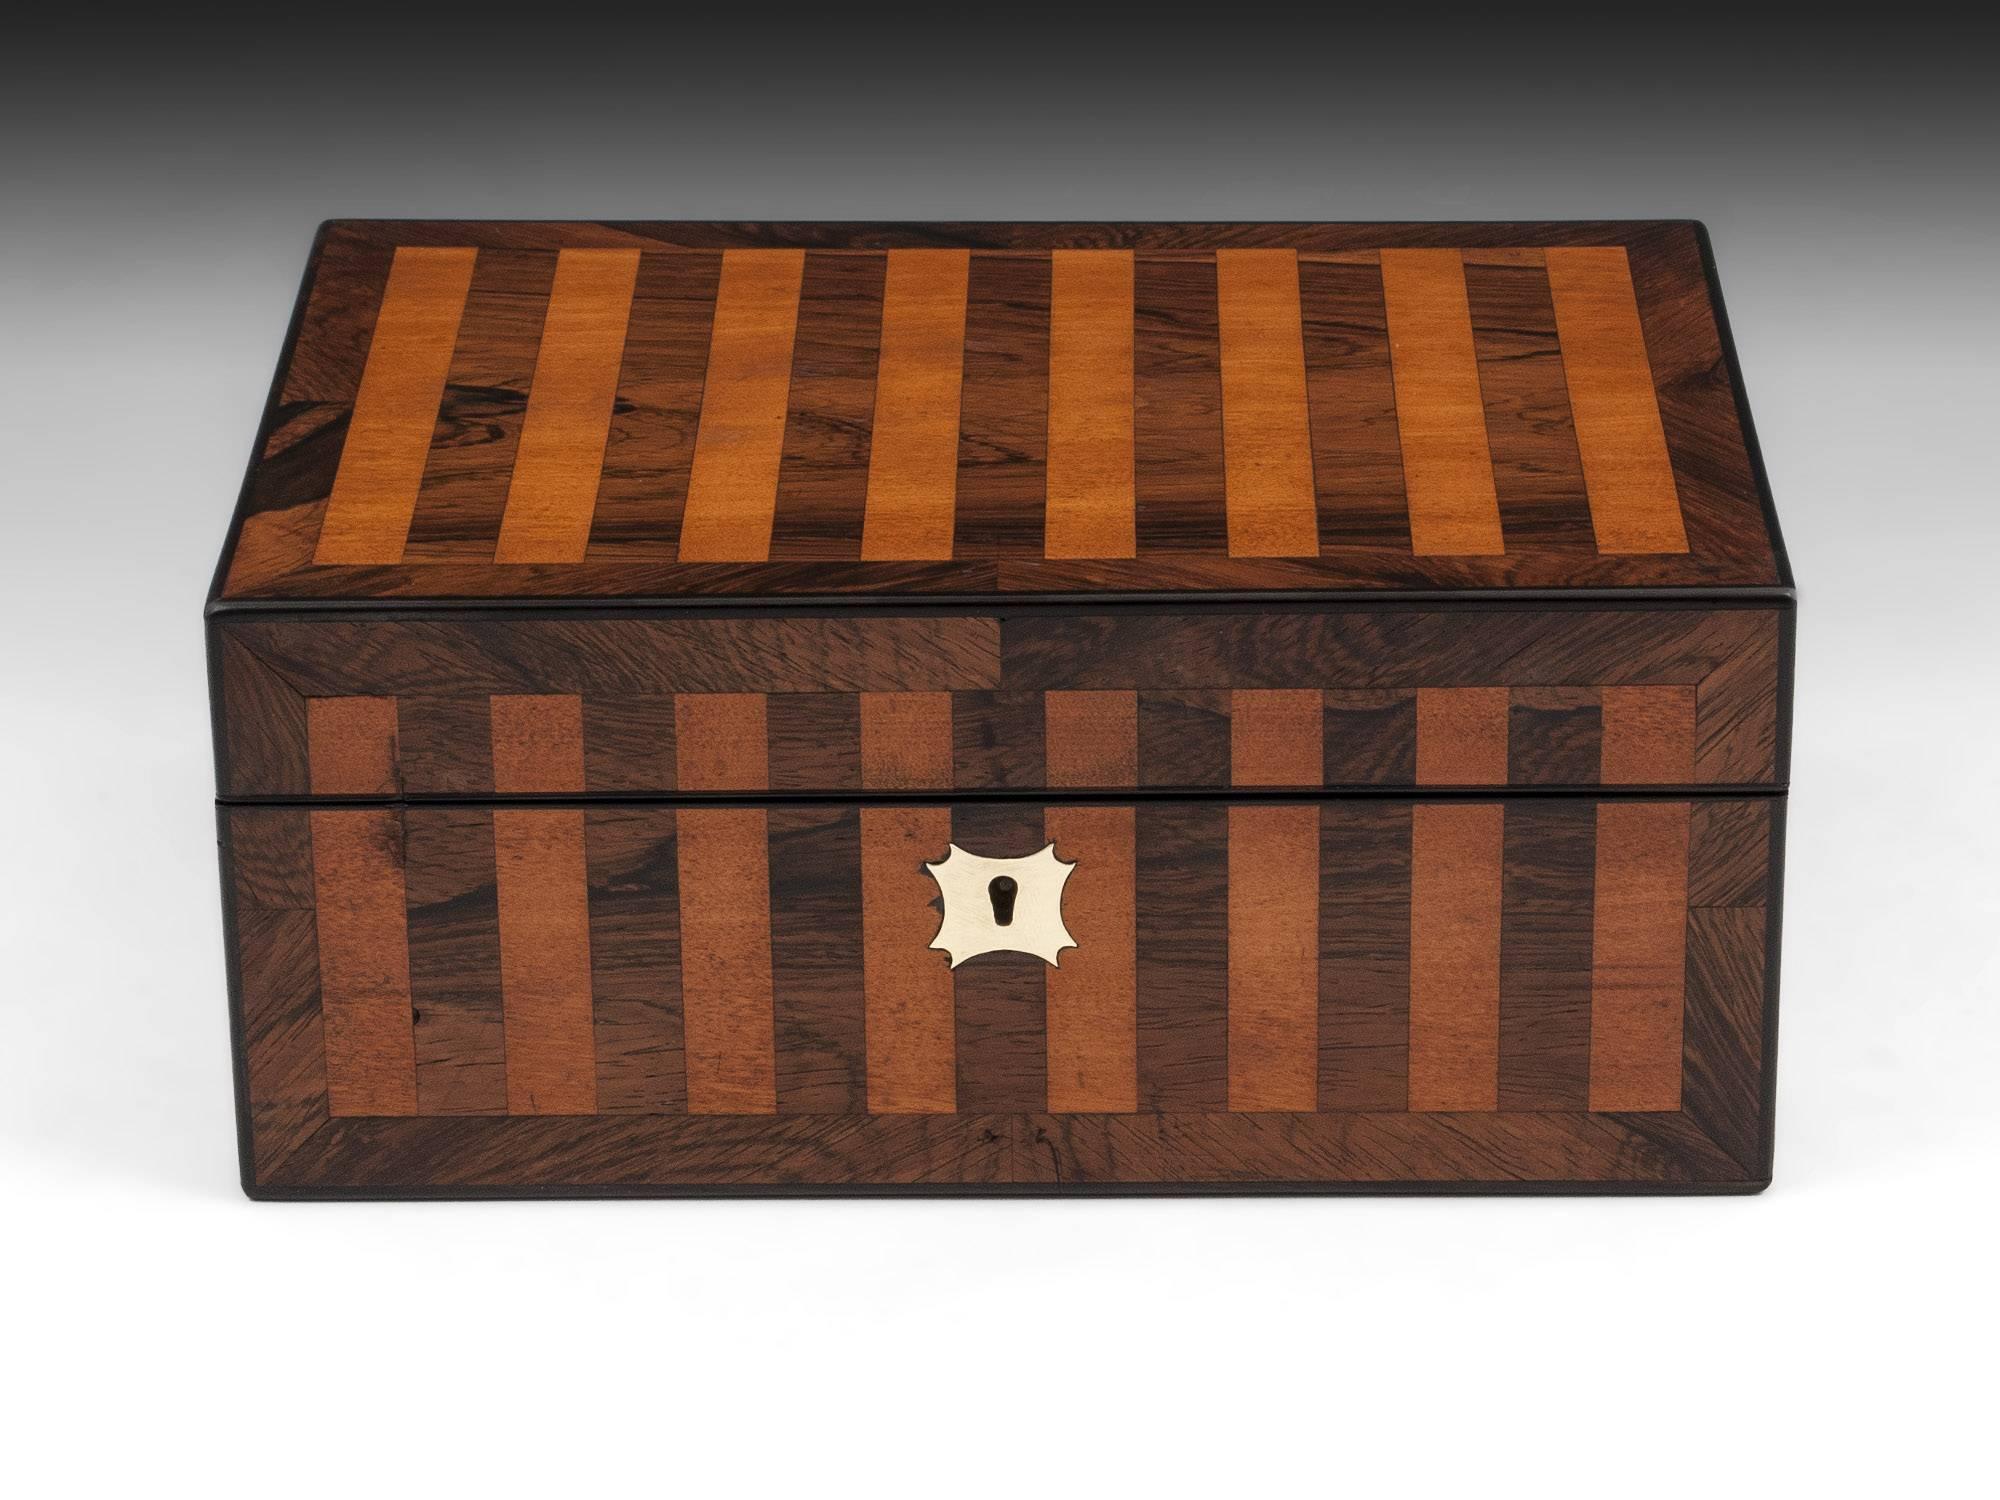 Antique jewelry box with inlaid mahogany and satinwood stripes to the front and top with an ornate brass escutcheon. 

Opening the box reveals the striking royal blue velvet and silk paper lined interior, which features a removable jewelry tray